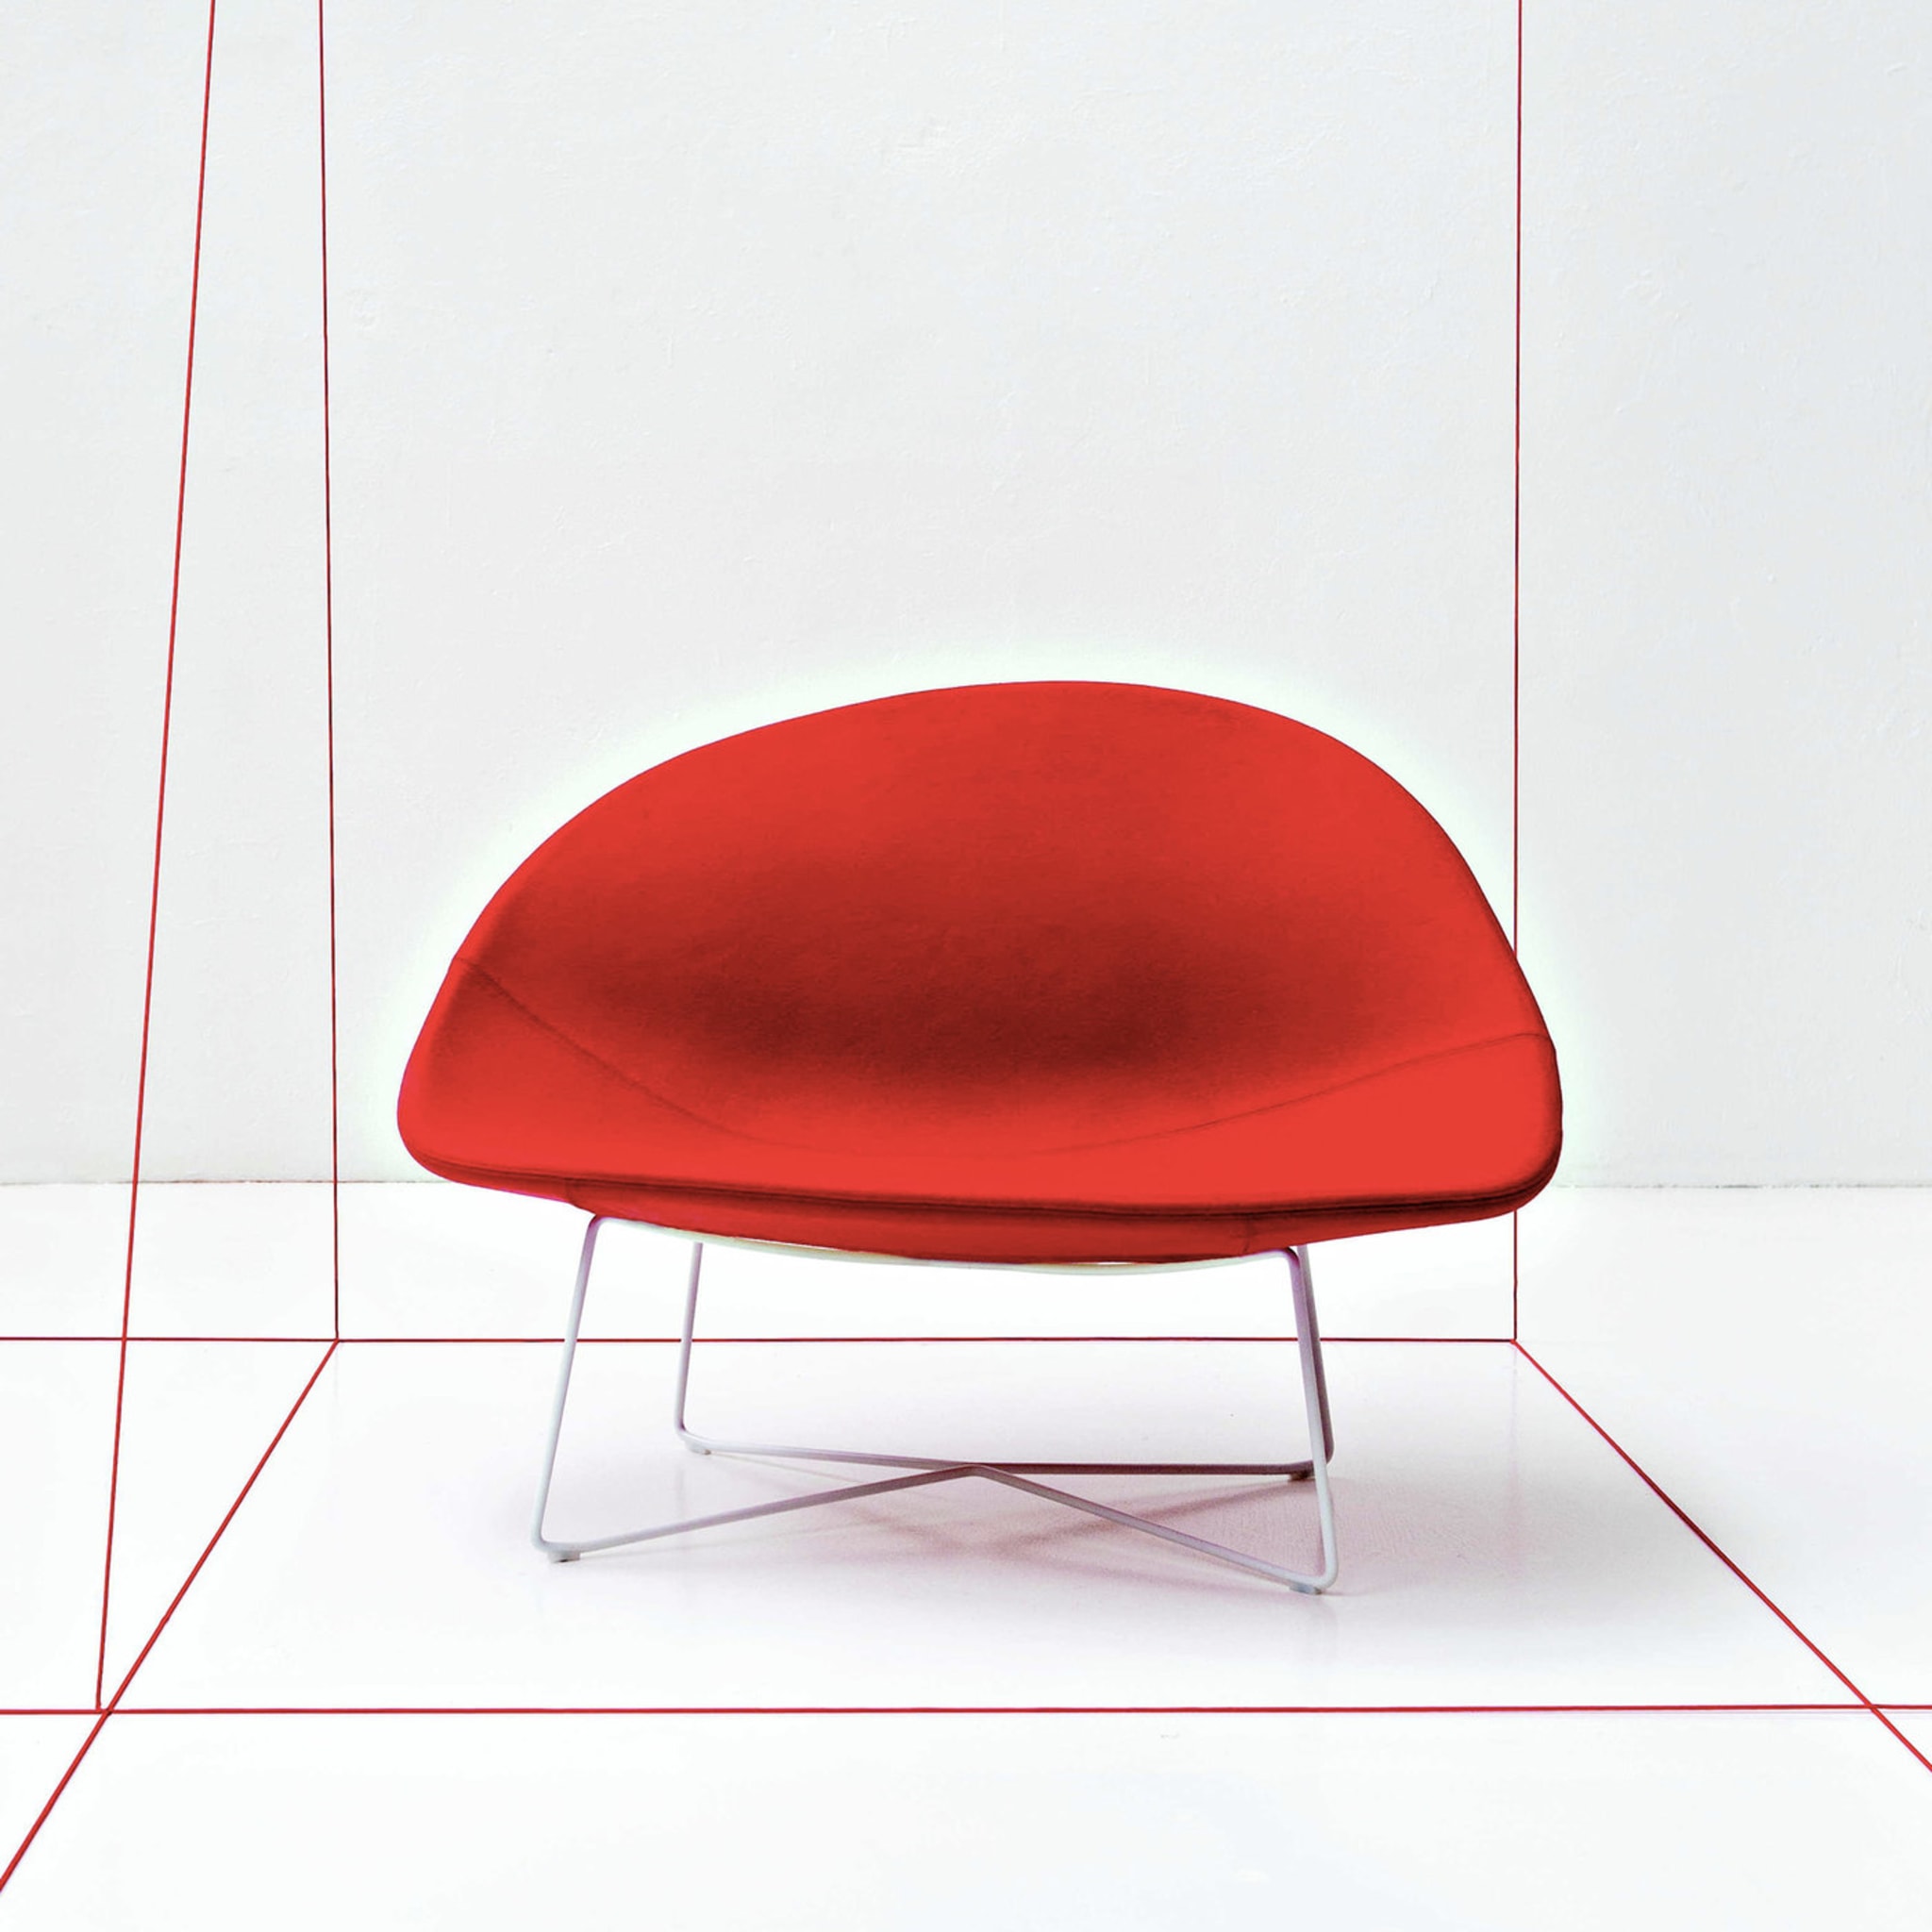 Isola Red Accent Chair by Claesson Koivisto Rune - Alternative view 1